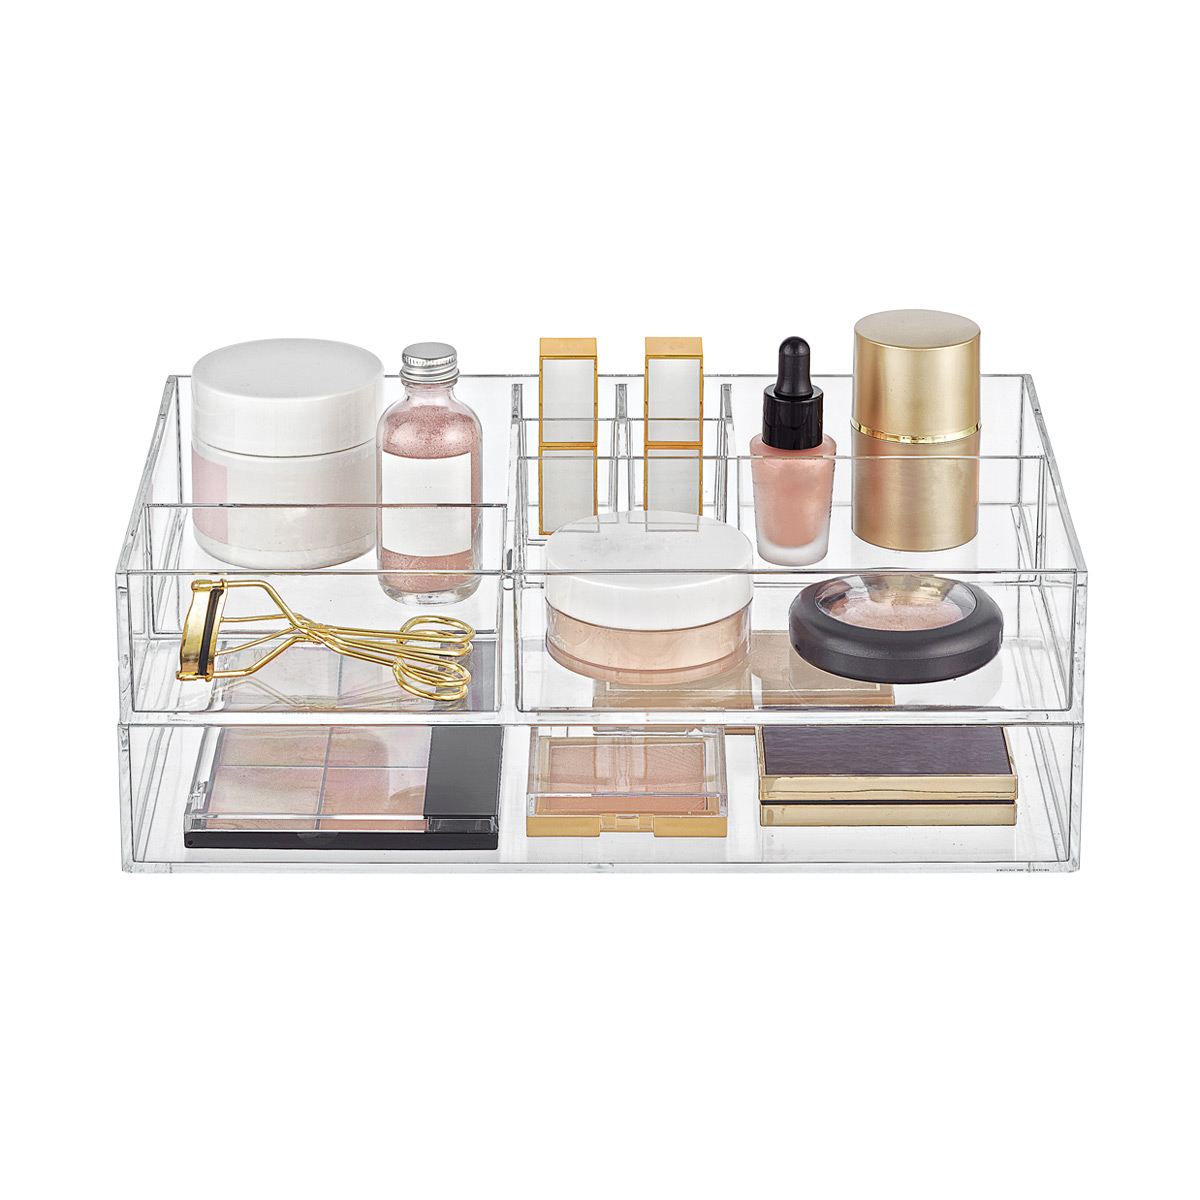 Clear Acrylic & Skin Care Starter Kit | The Container Store